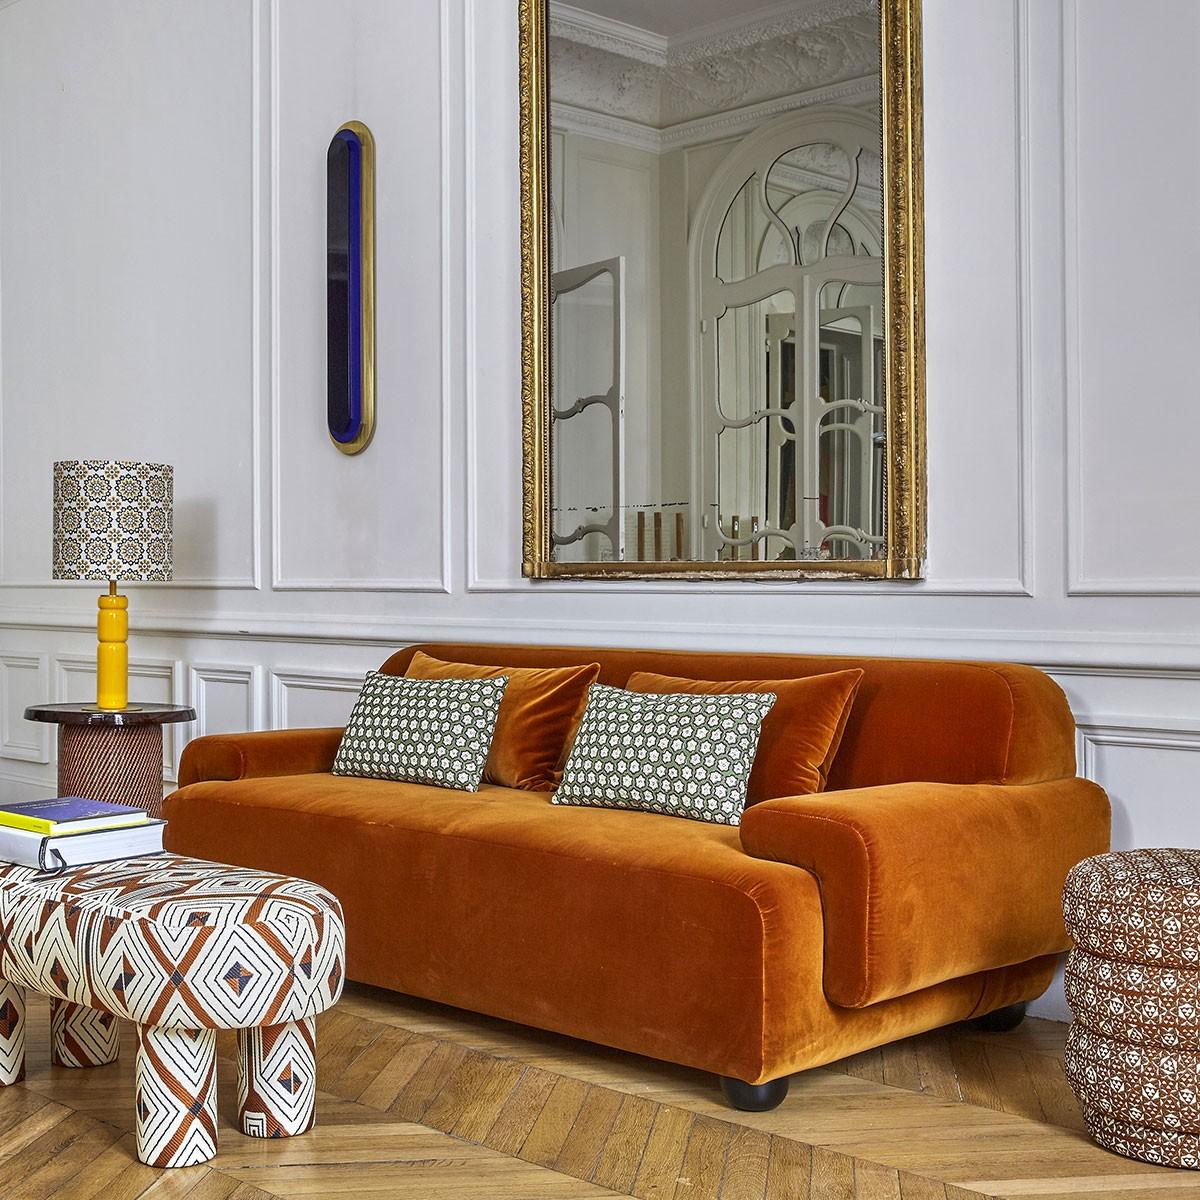 Popus editions lena 4 seater sofa in orange verone velvet upholstery.

It looks like it's straight out of a movie, with its generous curves and wide armrests. It is a real invitation to spend long Sundays with the family, comfortably seated in